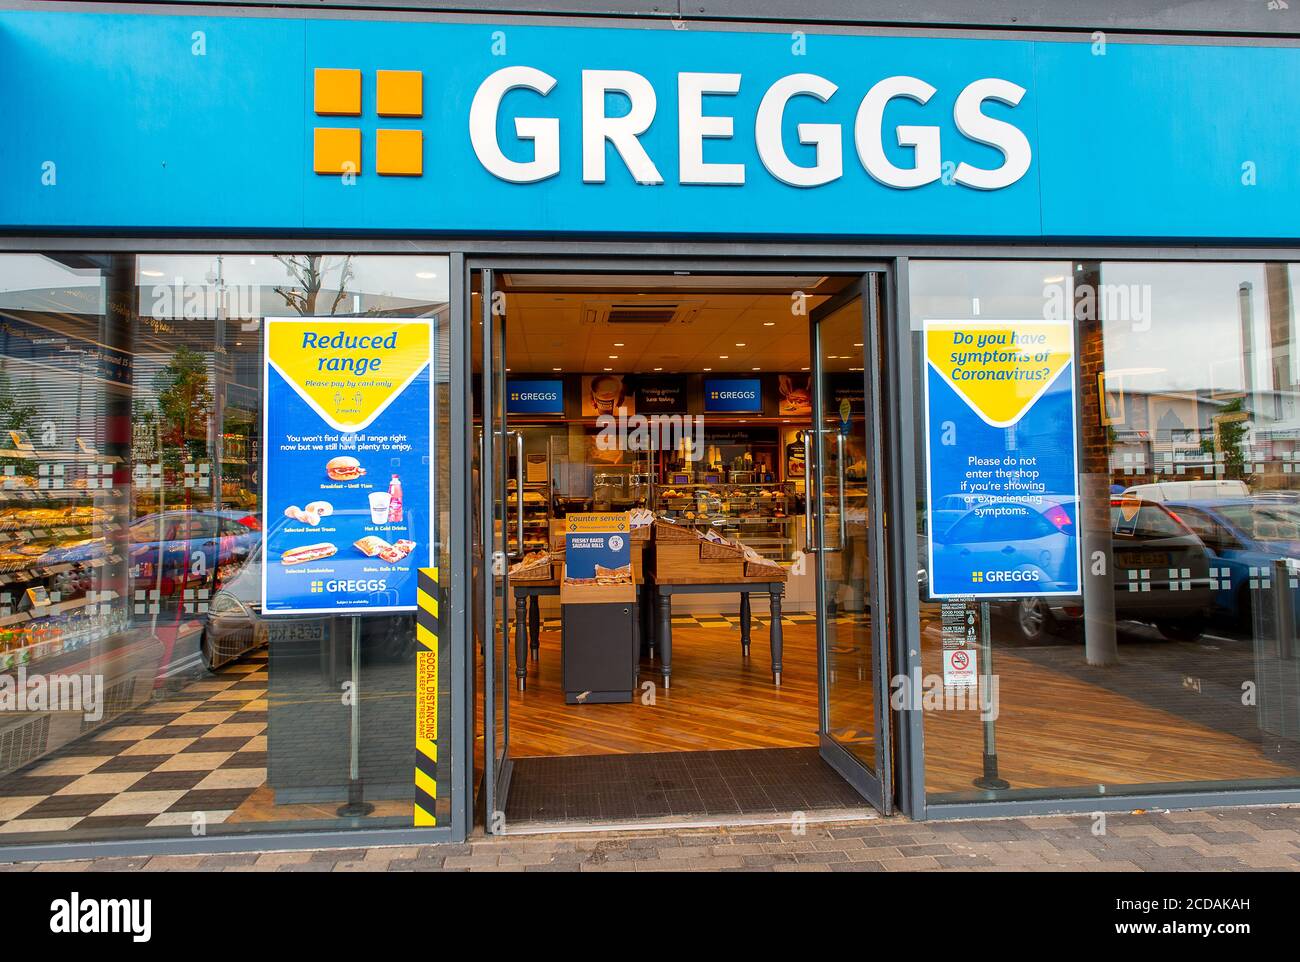 Slough, Berkshire, UK. 18th June, 2020. The Greggs bakers shop on Slough Trading Estate in Berkshire reopened today following the easing of the Coronavirus Covid-19 Pandemic lockdown. A maximum of 5 customers are allowed in at any one time and the opening hours are reduced as well as the range on offer. Credit: Maureen McLean/Alamy Stock Photo